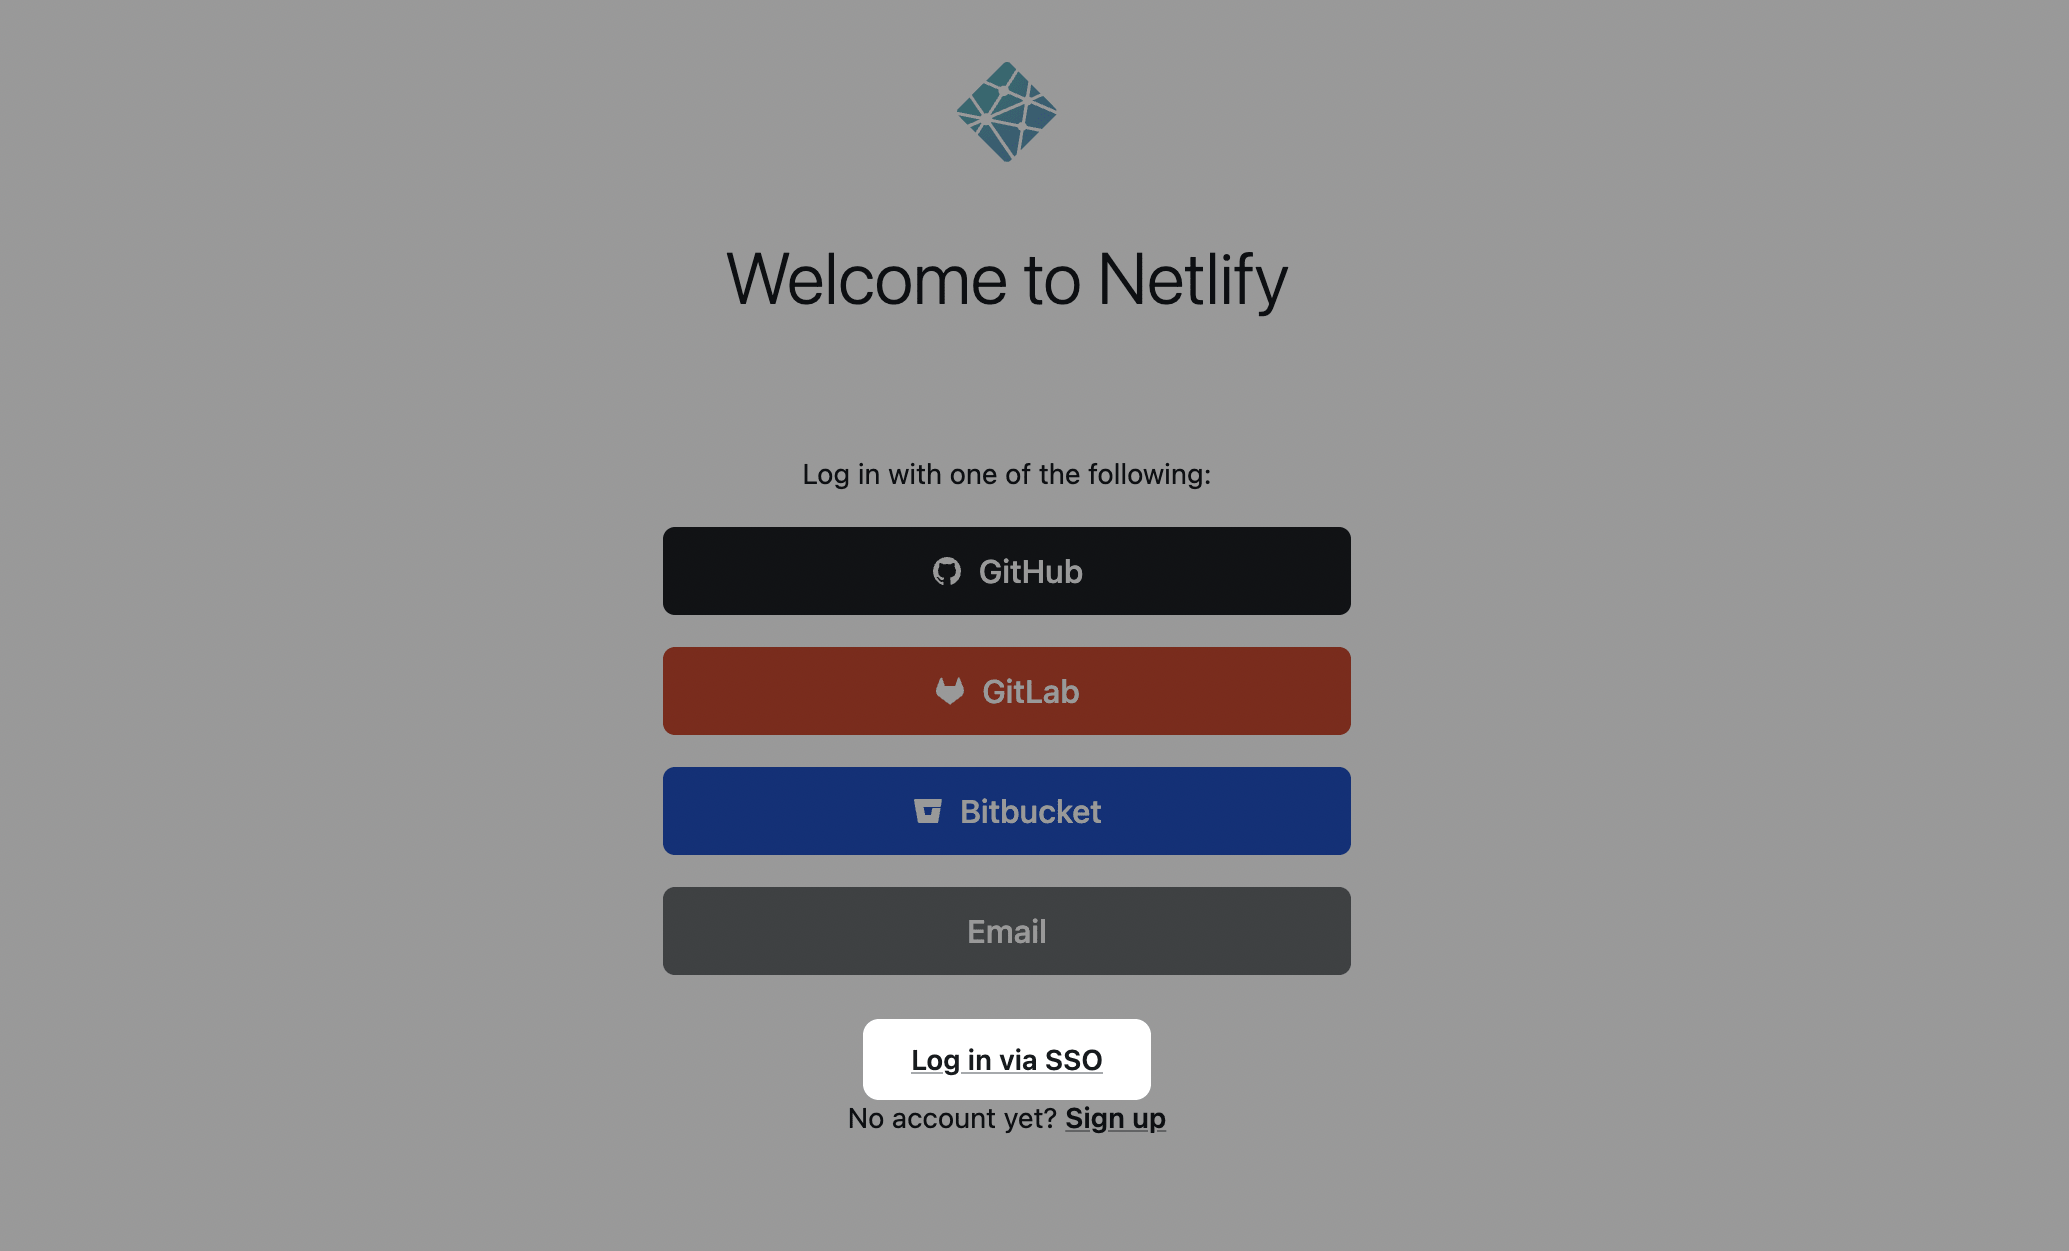 The standard Netlify login interface includes a link to log in using SSO.